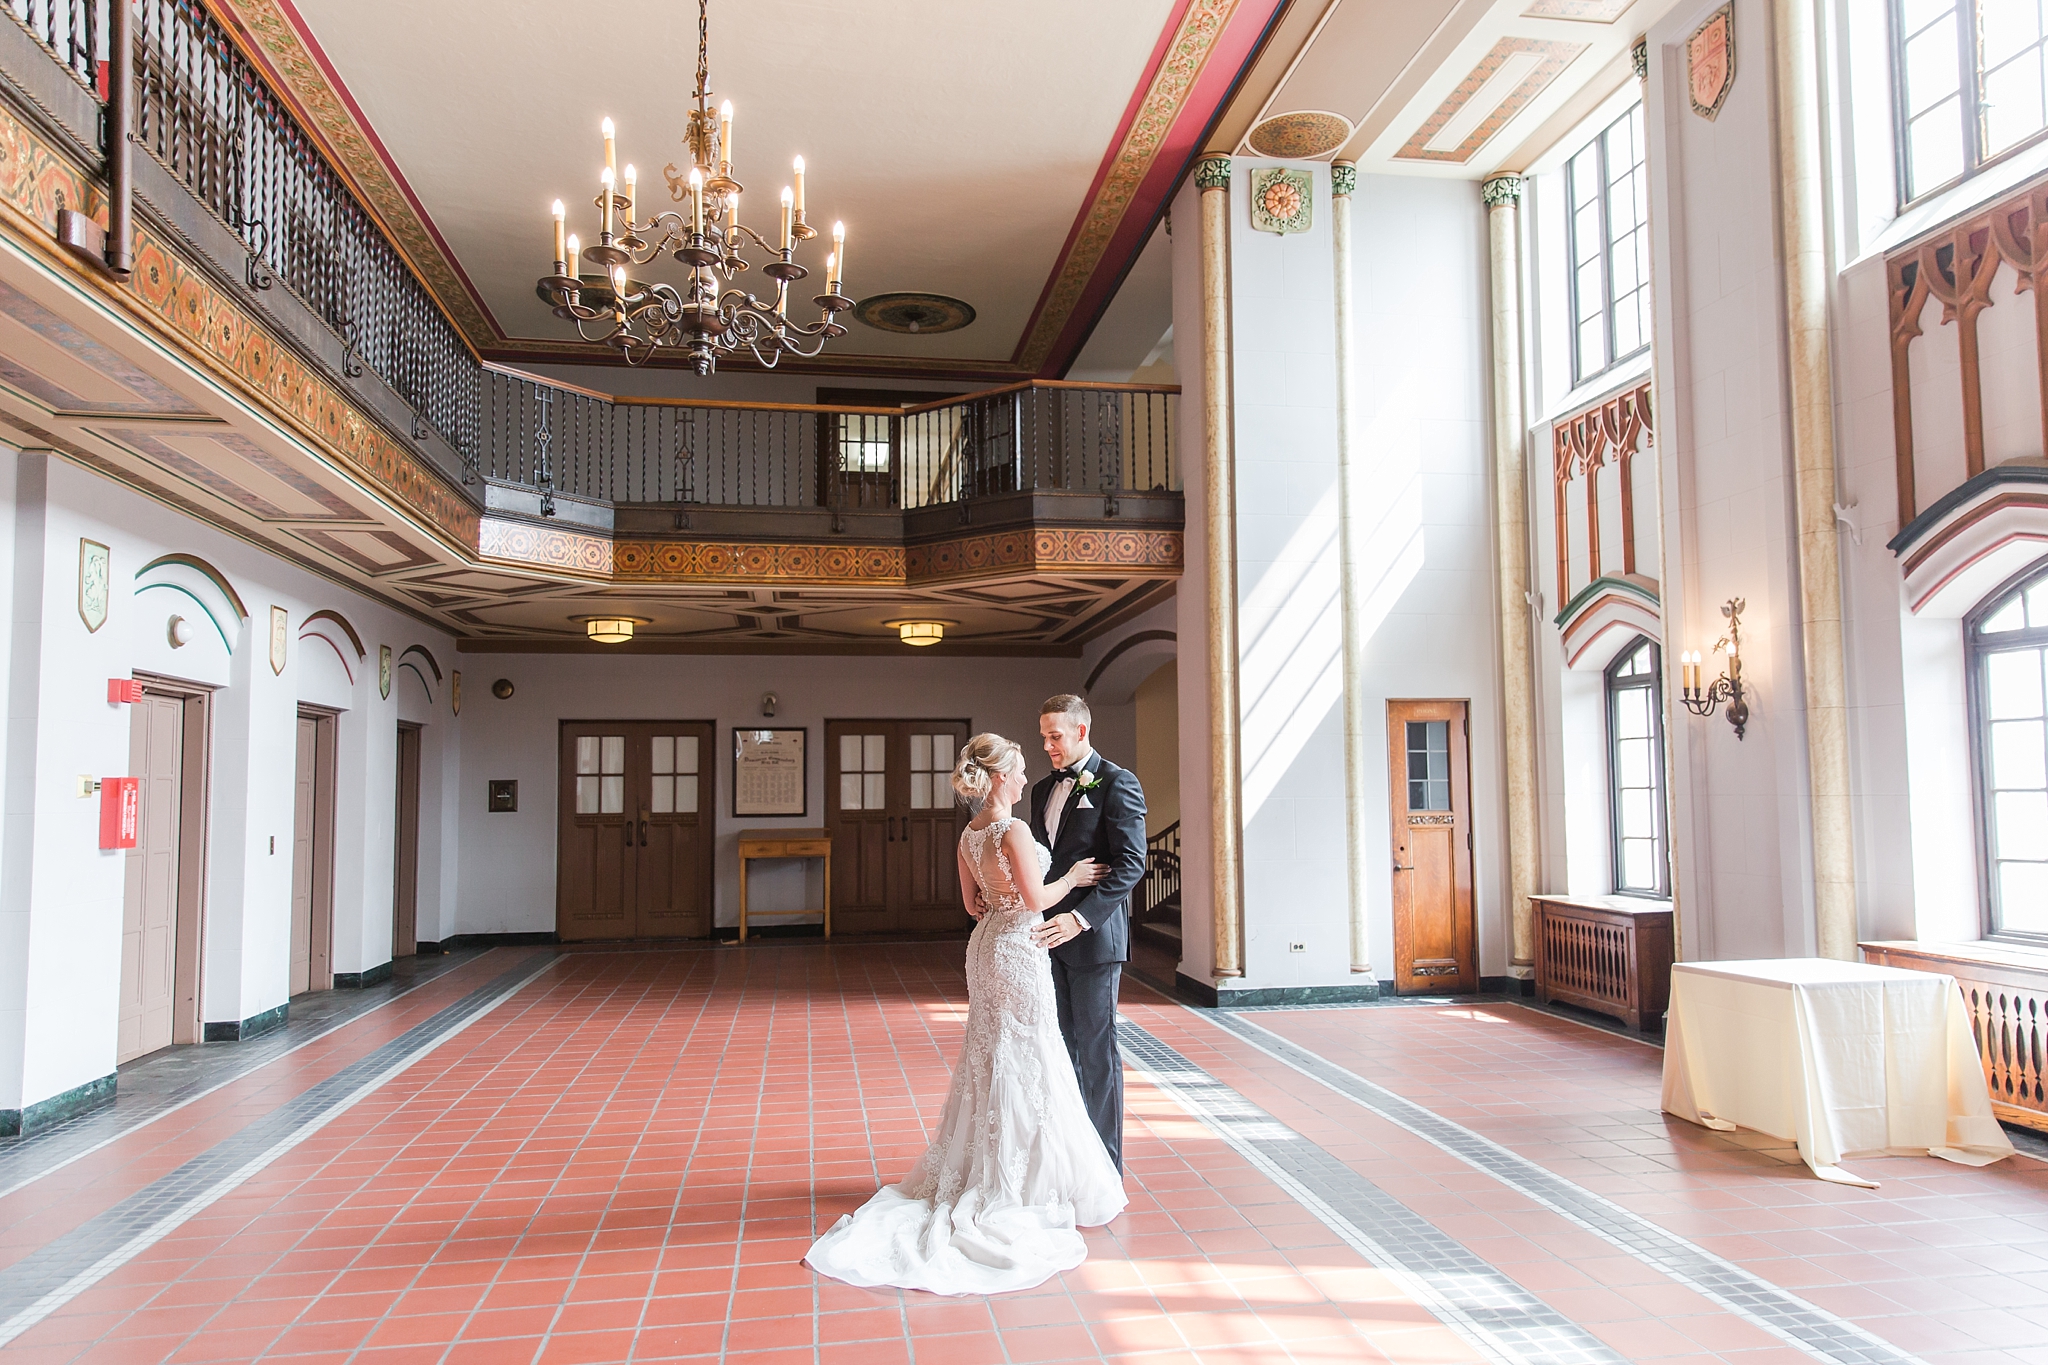 candid-romantic-wedding-photos-at-the-masonic-temple-belle-isle-detroit-institute-of-arts-in-detroit-michigan-by-courtney-carolyn-photography_0025.jpg